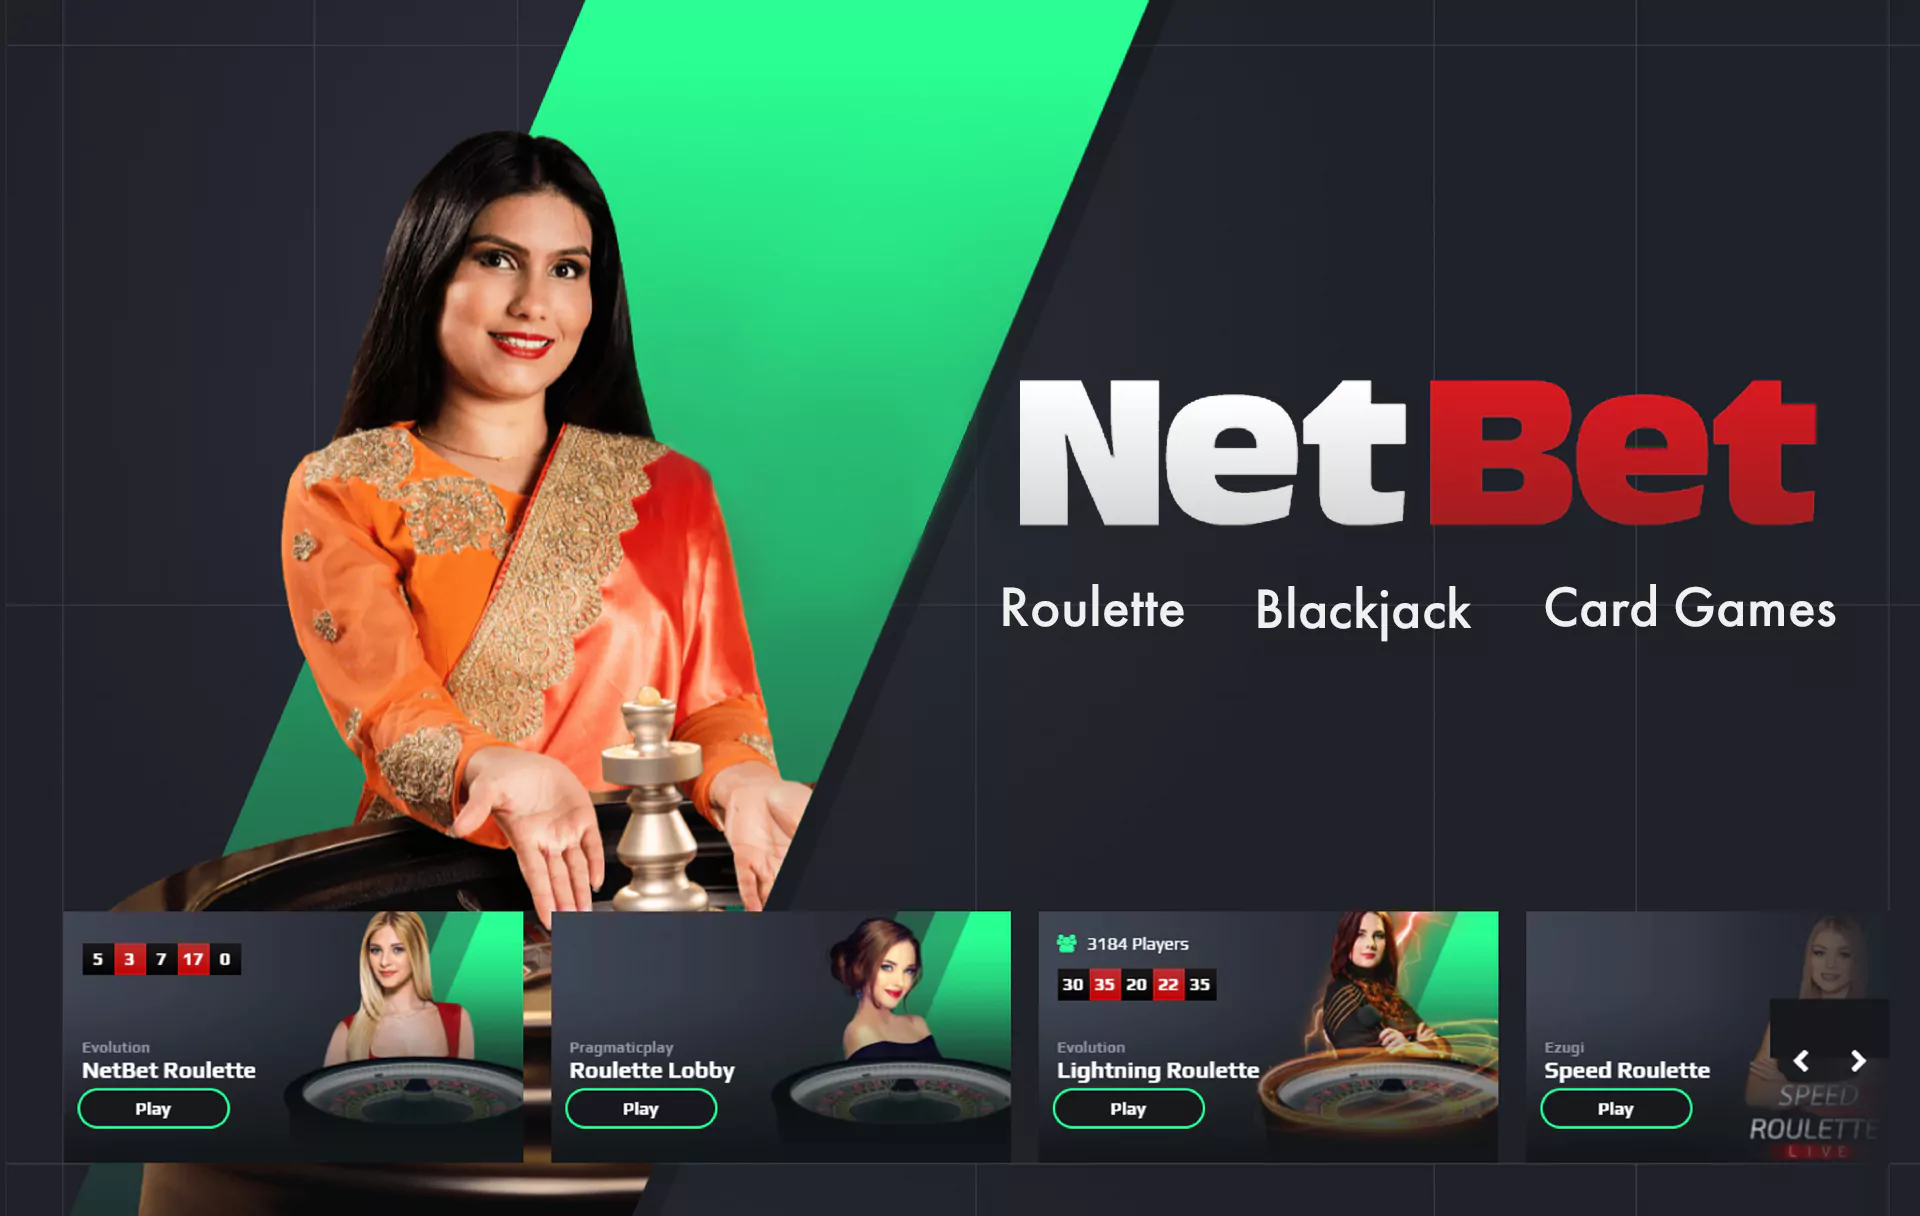 Play casino games on the Netbet.